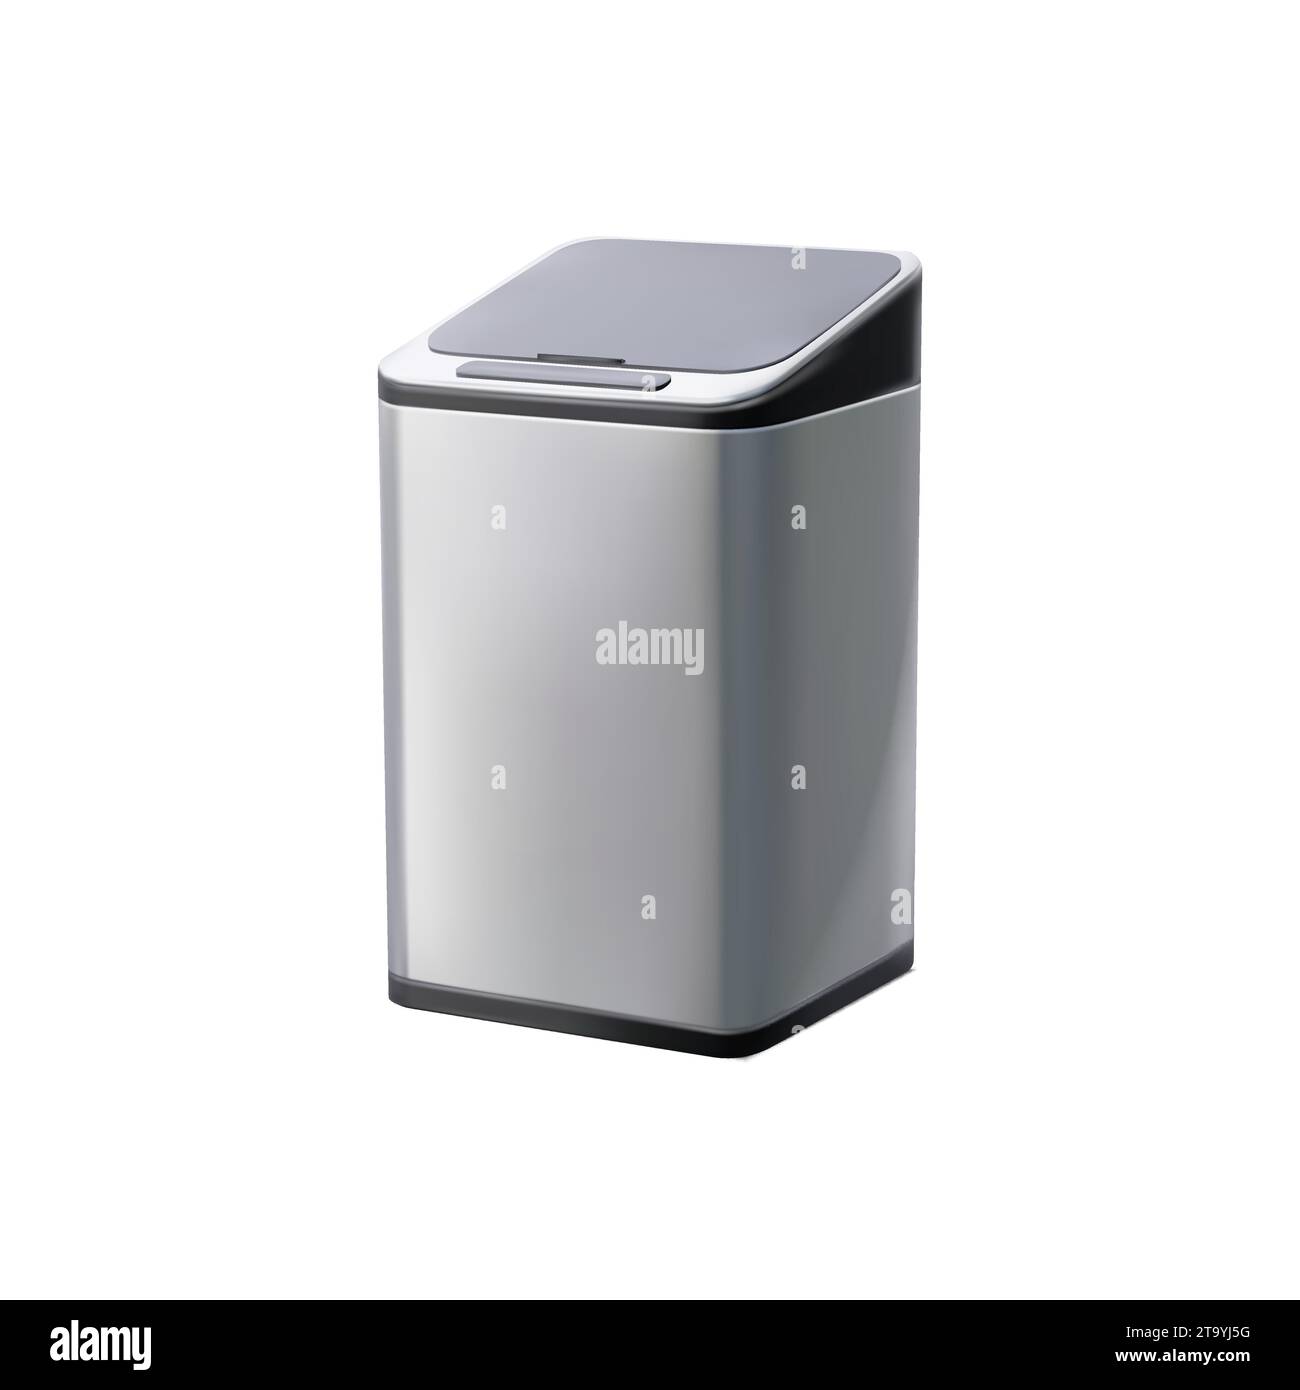 https://c8.alamy.com/comp/2T9YJ5G/realistic-bucket-metal-container-and-bin-isolated-3d-vector-practical-trash-can-with-secure-plastic-lid-for-odor-control-and-cleanliness-sleek-des-2T9YJ5G.jpg